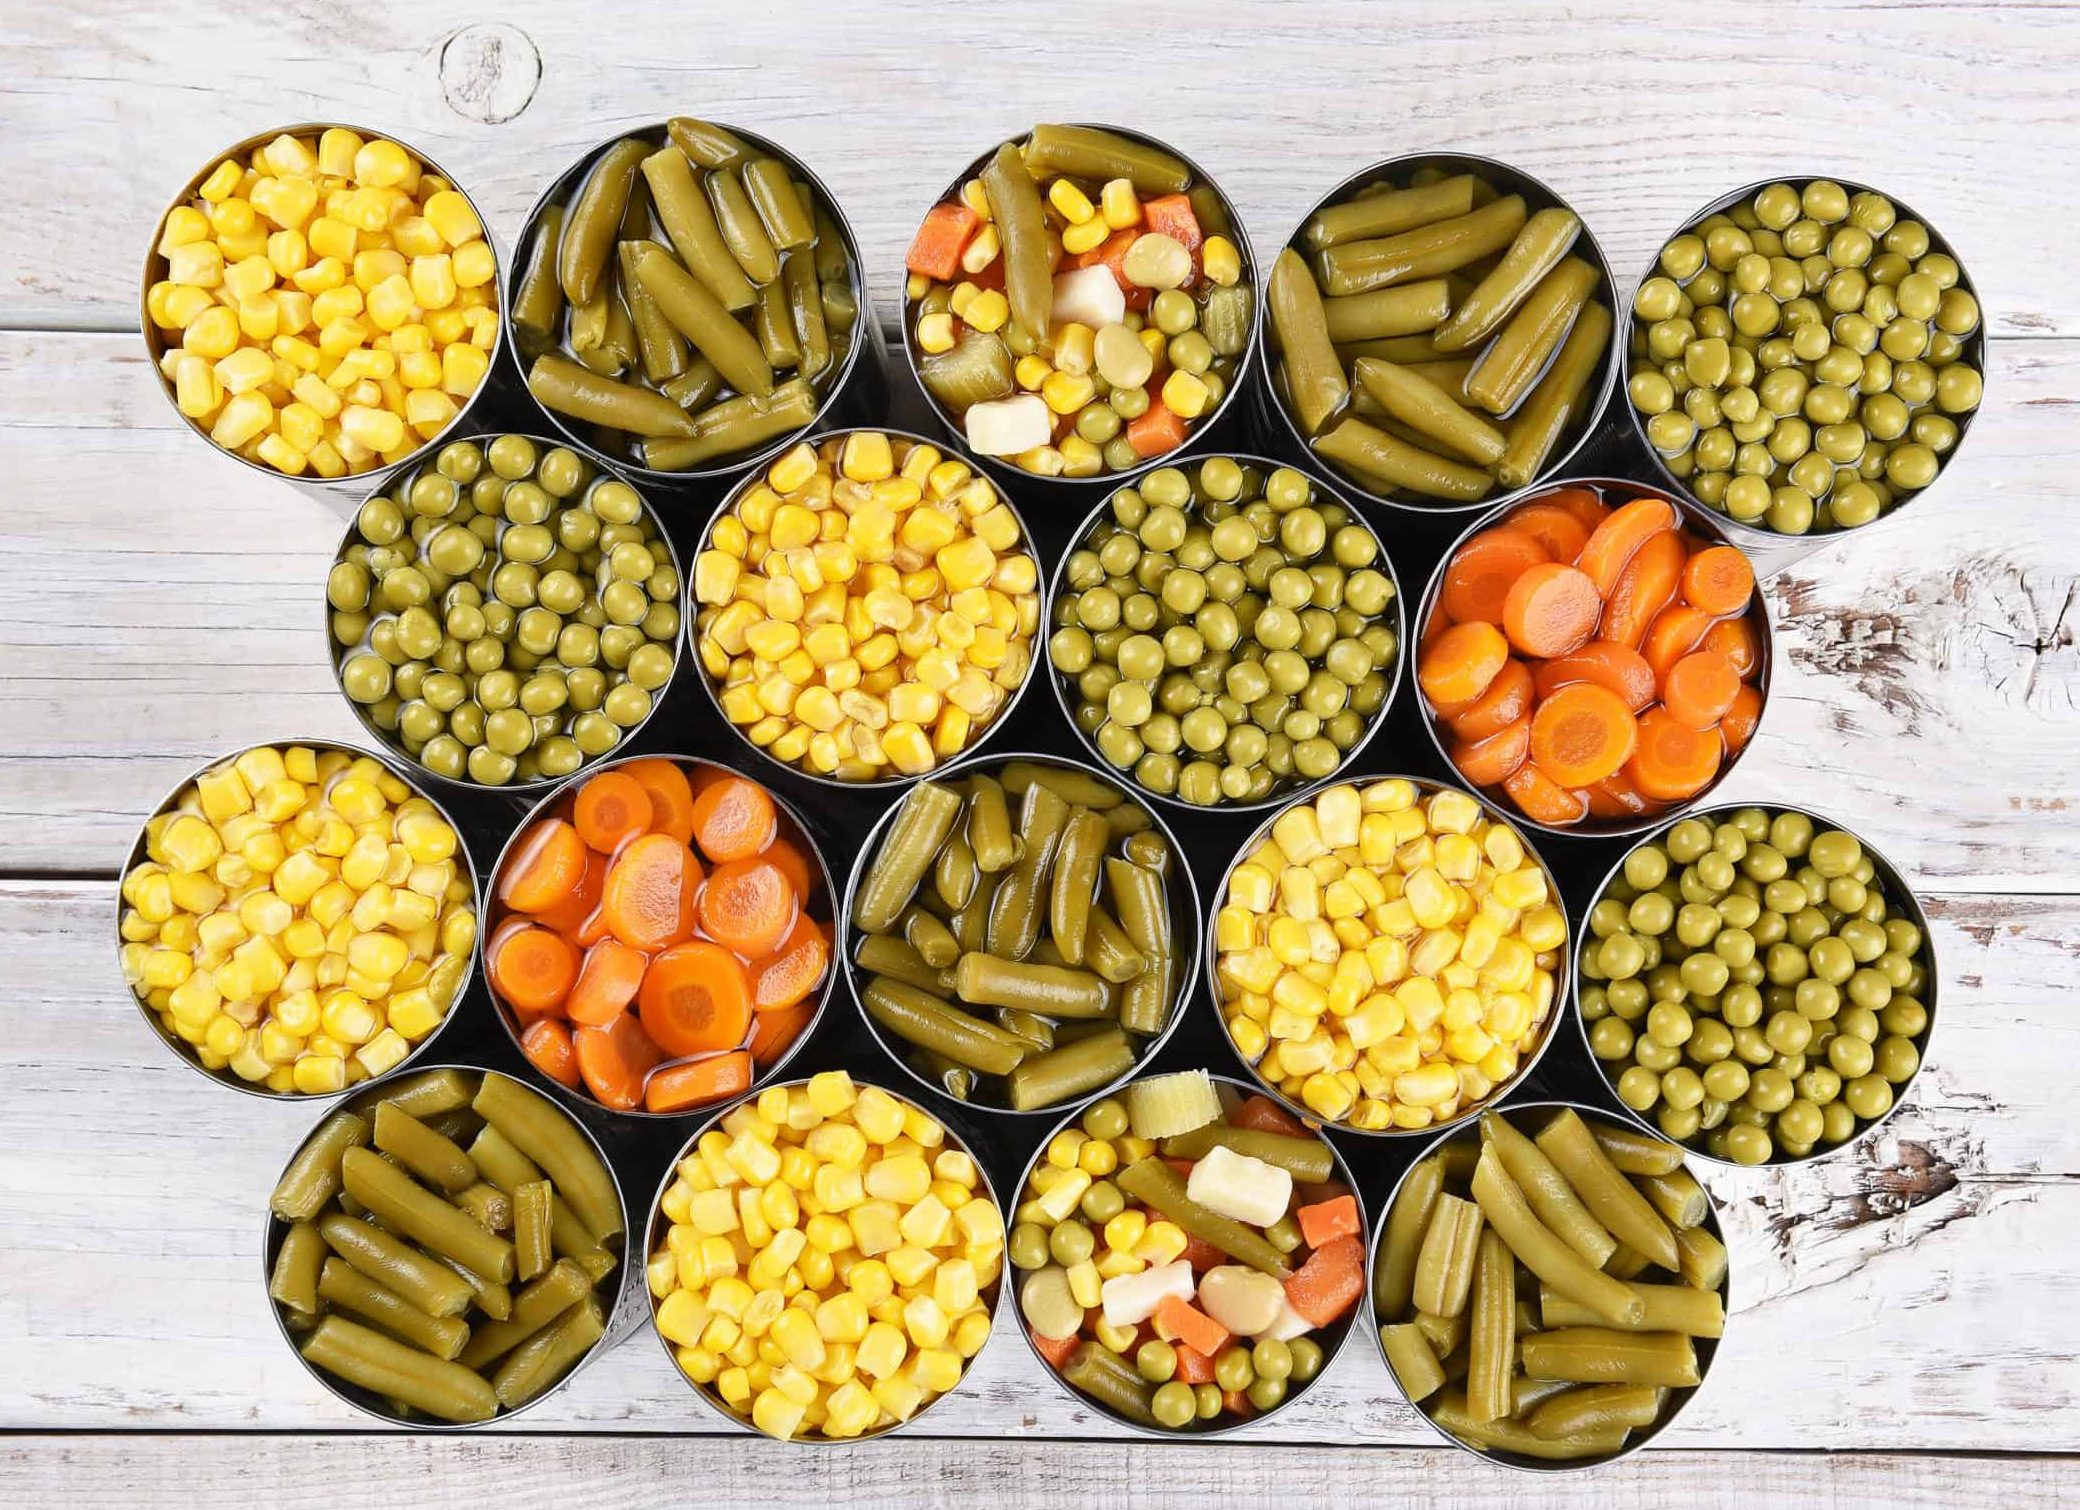 canned vegetables are vegan pantry items